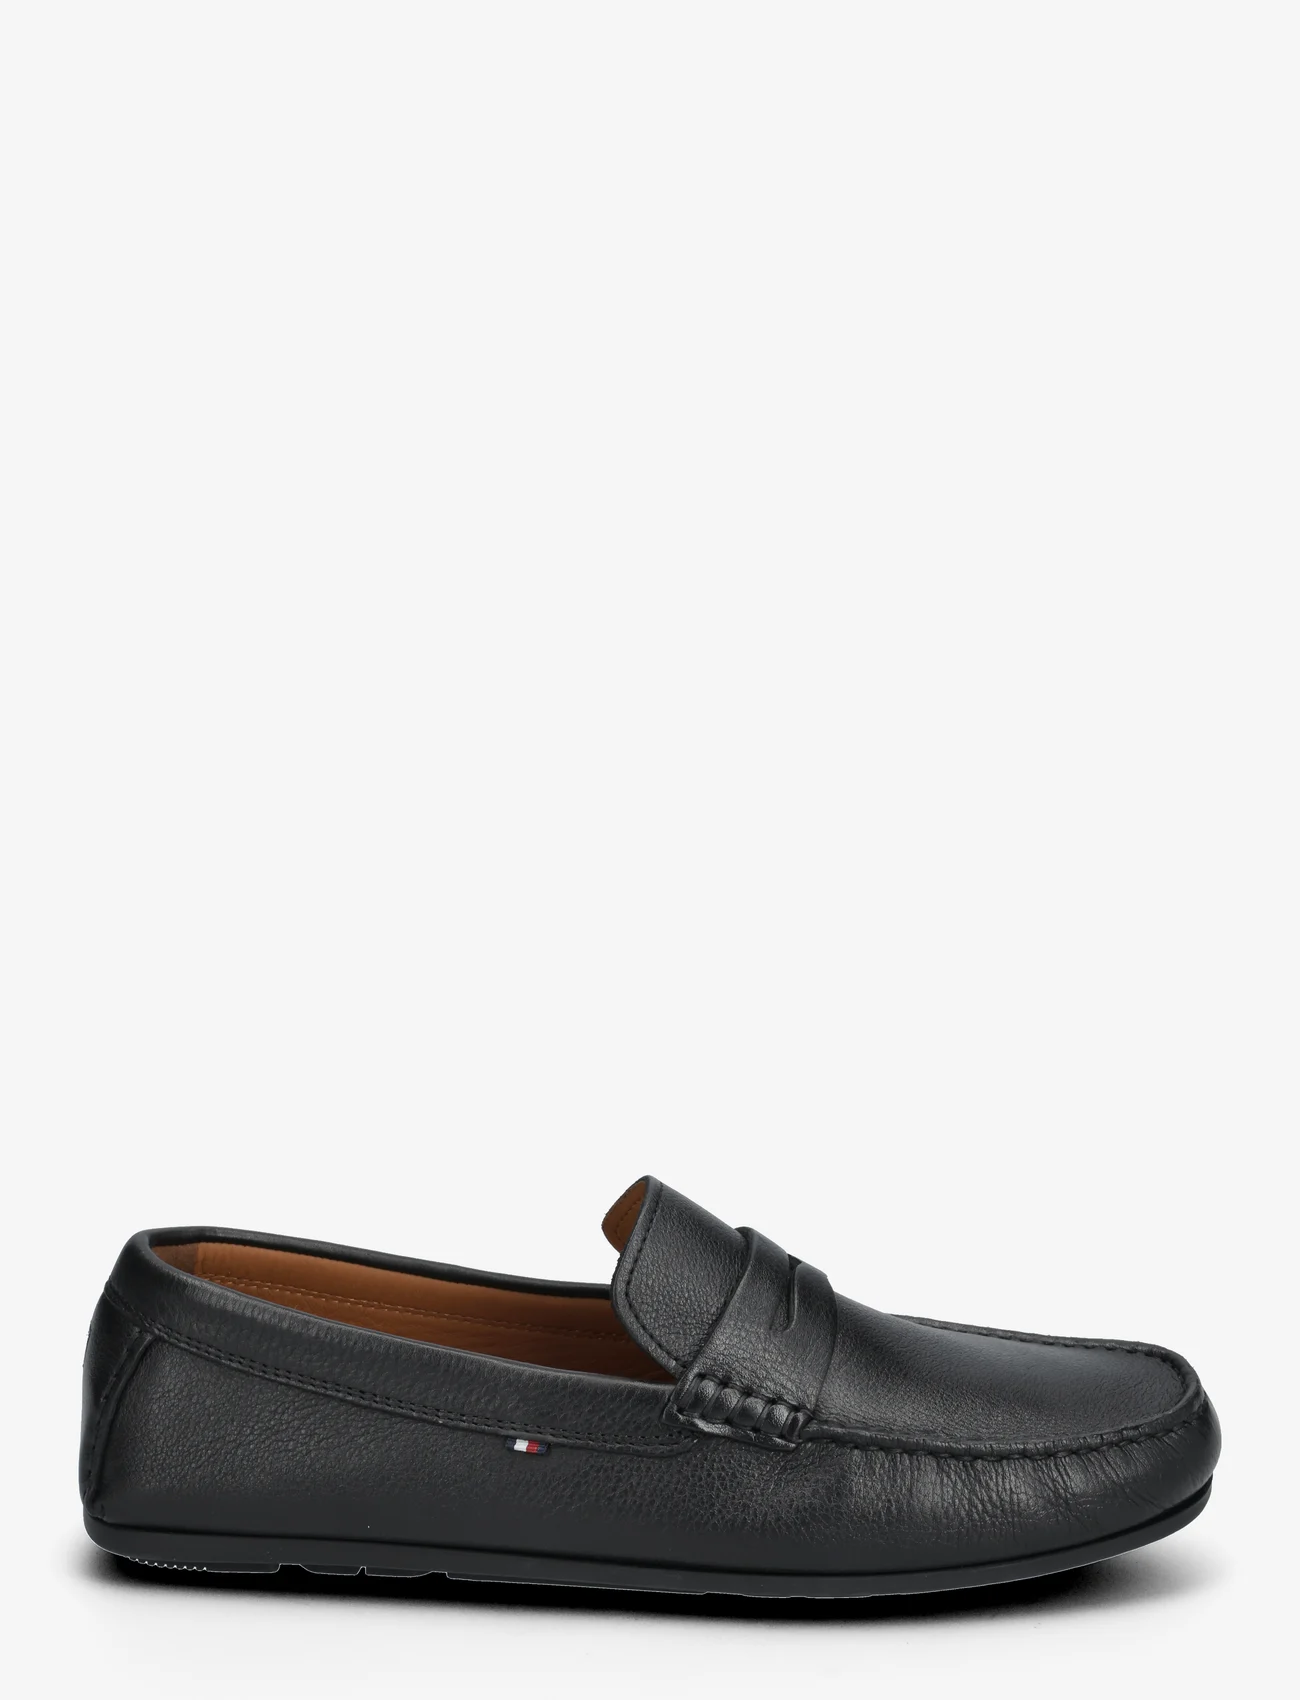 Tommy Hilfiger - CASUAL HILFIGER LEATHER DRIVER - buty wiosenne - black - 1